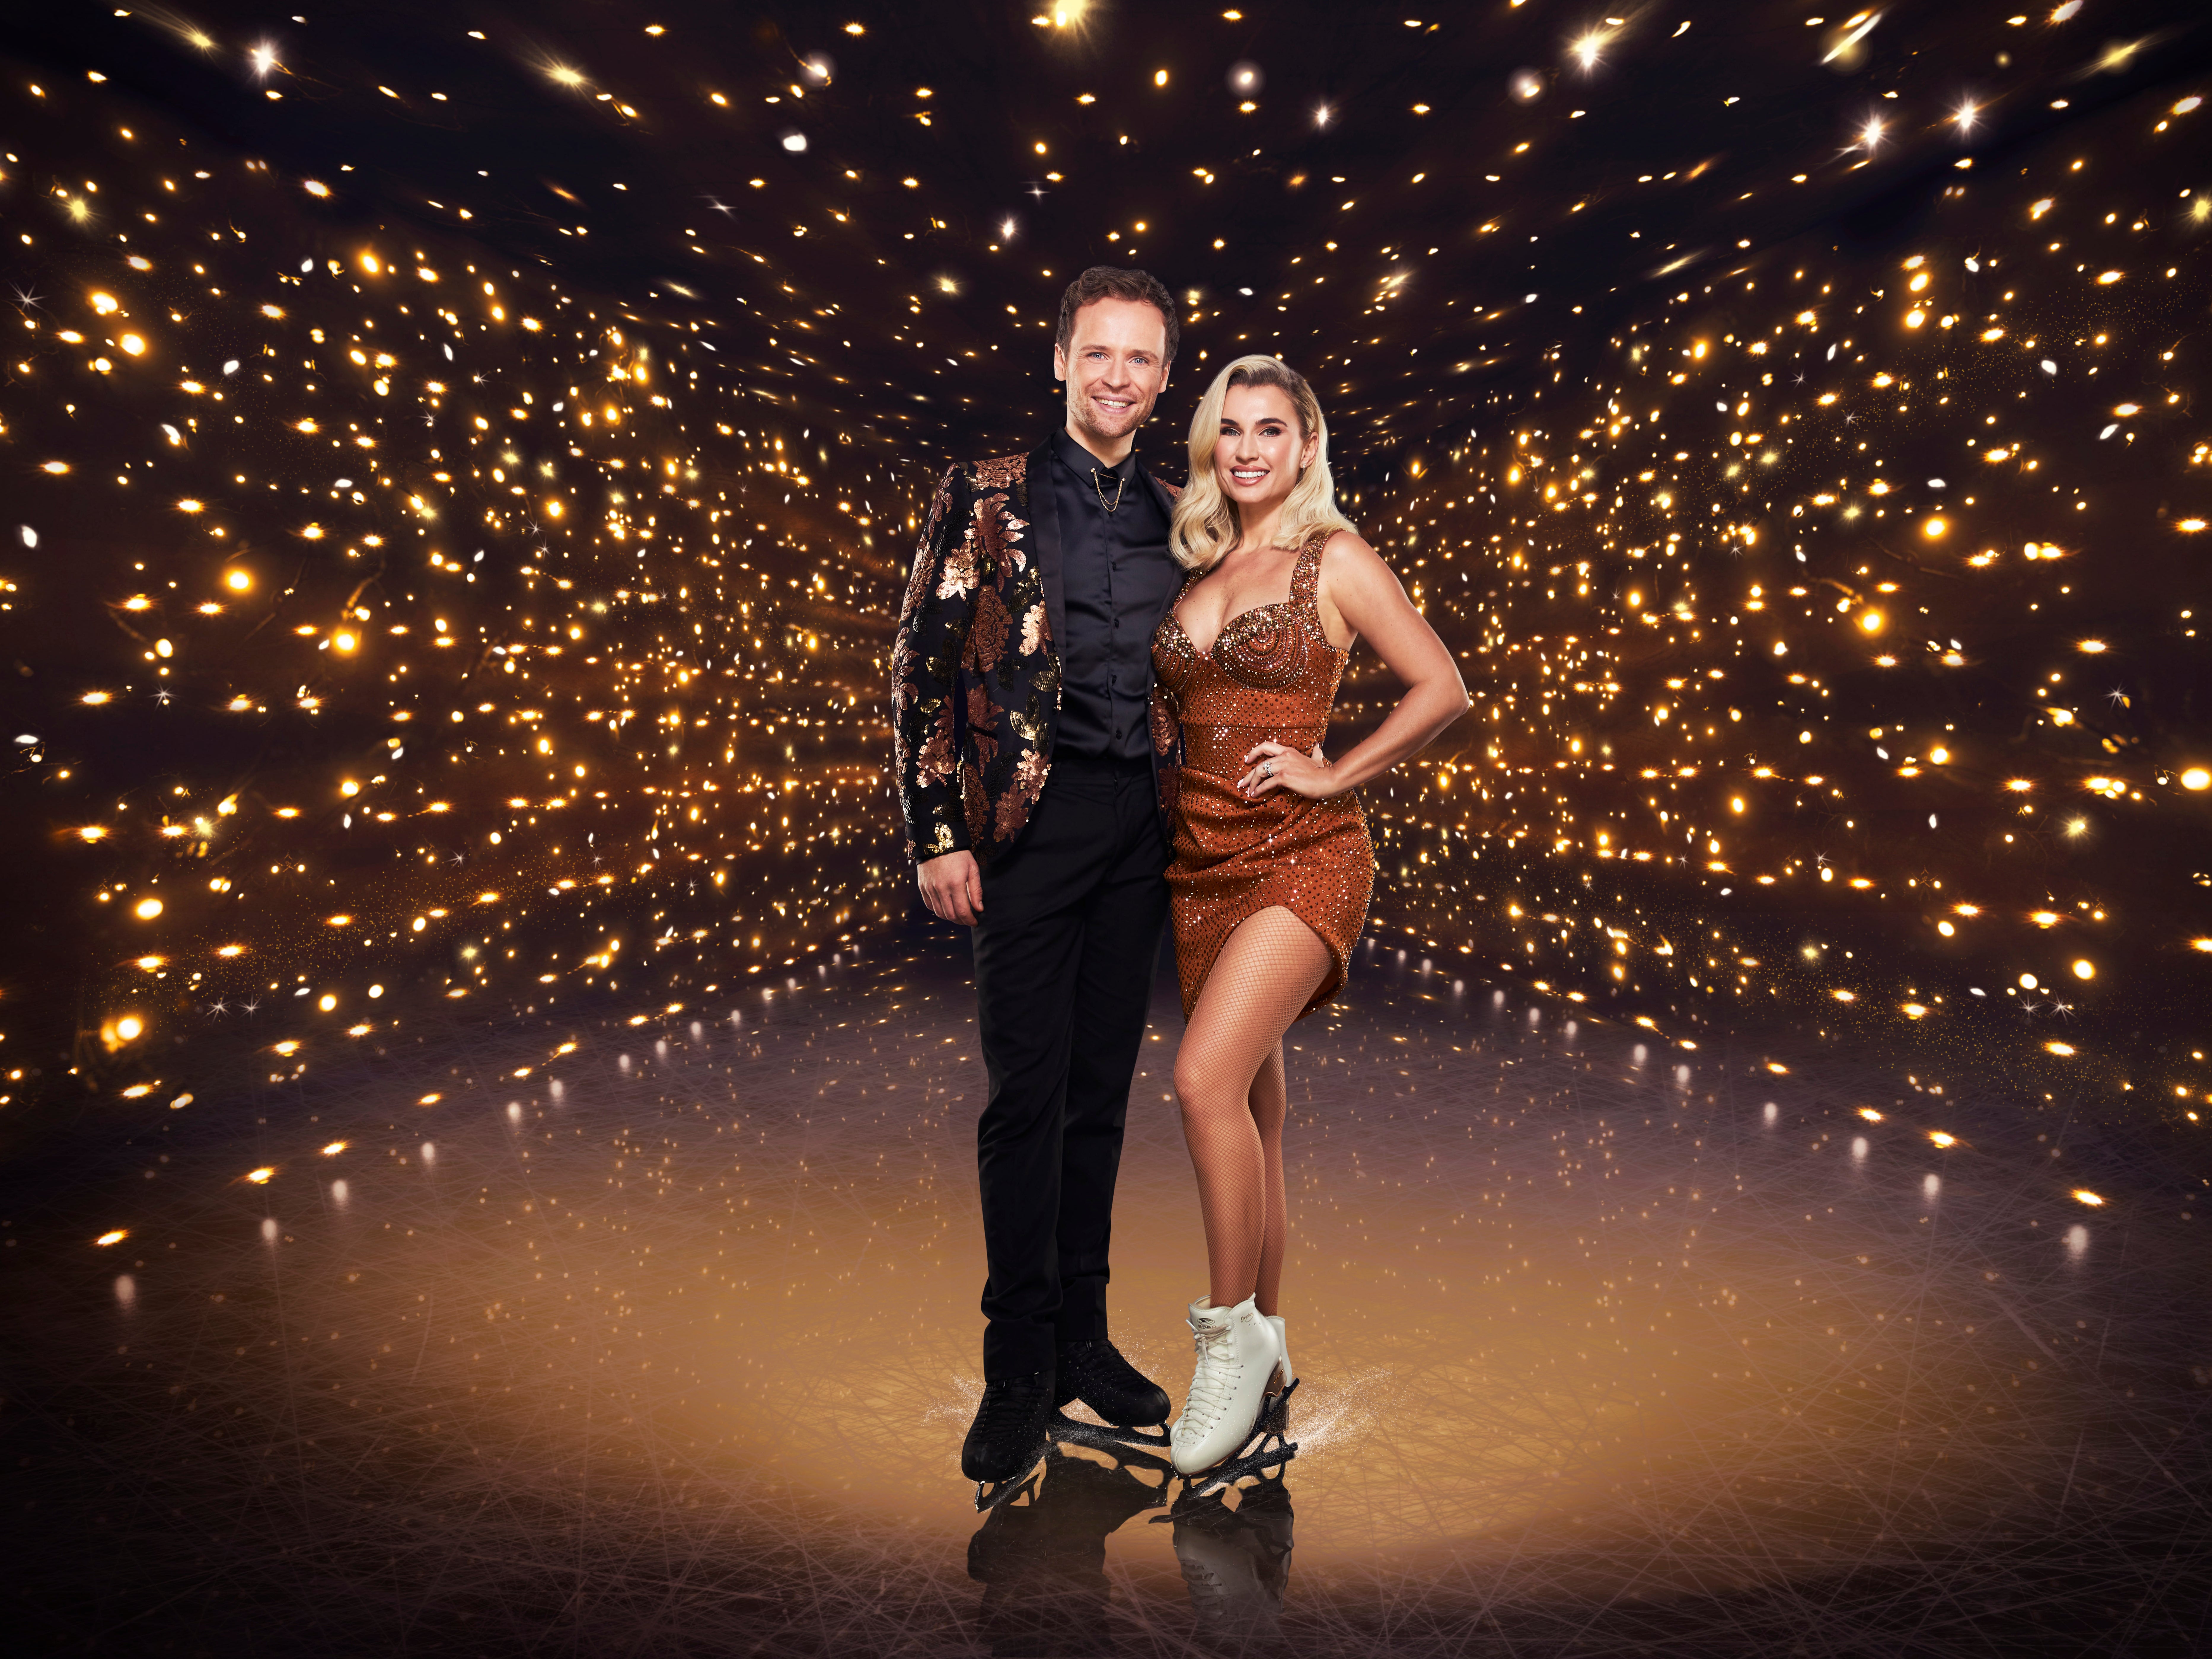 Shepherd and Hanretty won’t appear on Dancing on Ice this Sunday